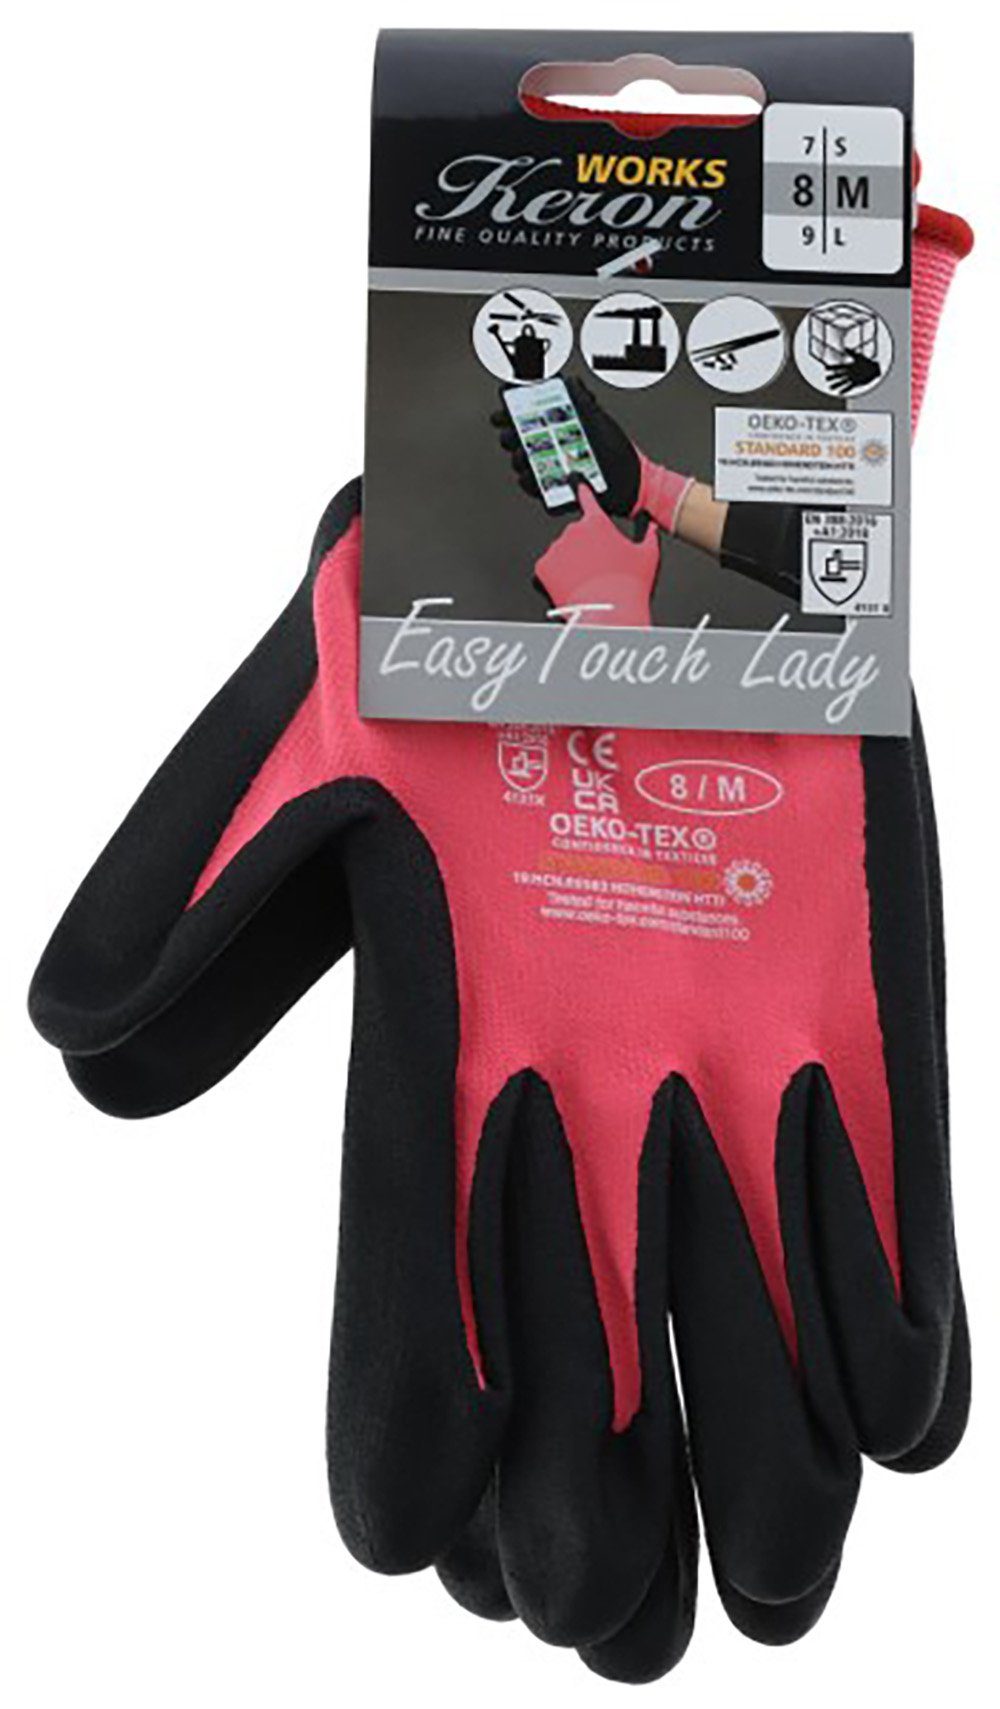 Touchscreenhandschuh Arbeitshandschuhe Lady, 3x 297957 Gr. Kerbl 7/S, pink, EasyTouch,